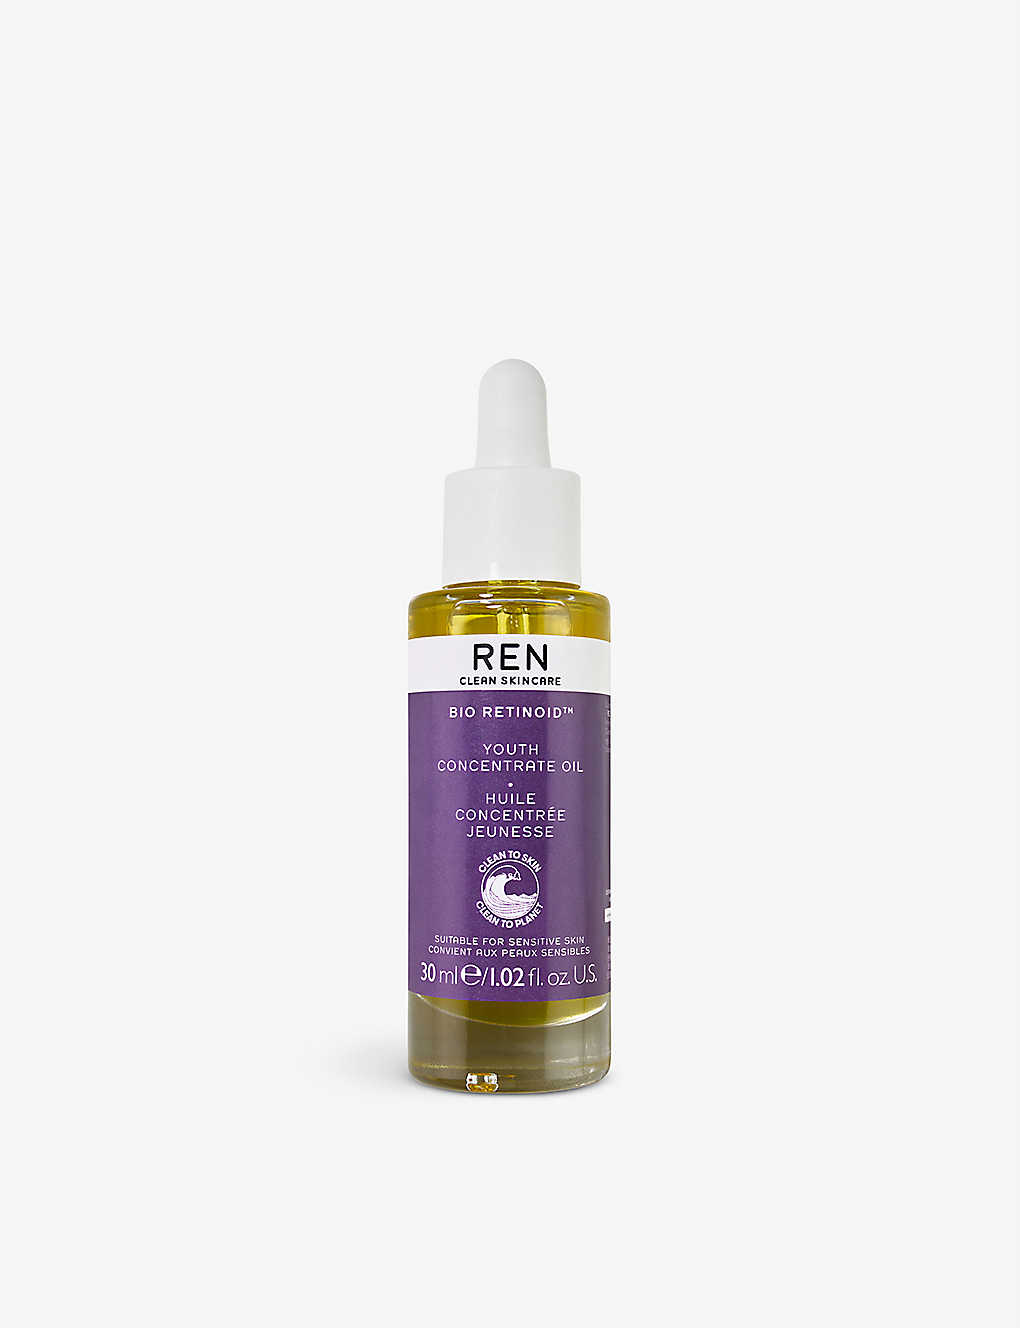 Ren Bio Retinoid™ Youth Concentrate Oil 30ml